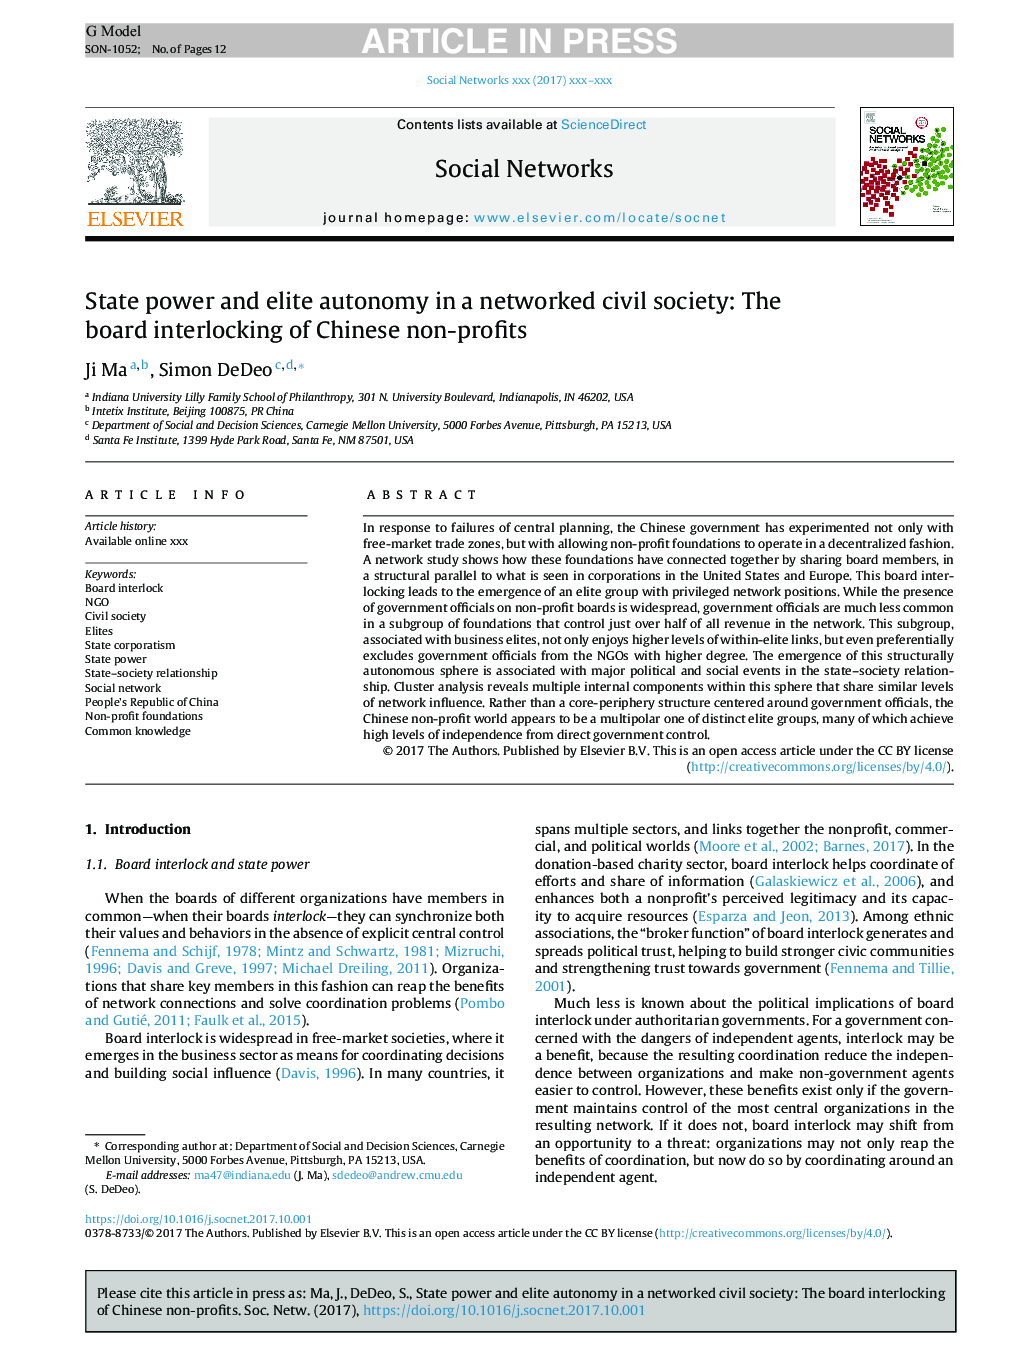 State power and elite autonomy in a networked civil society: The board interlocking of Chinese non-profits